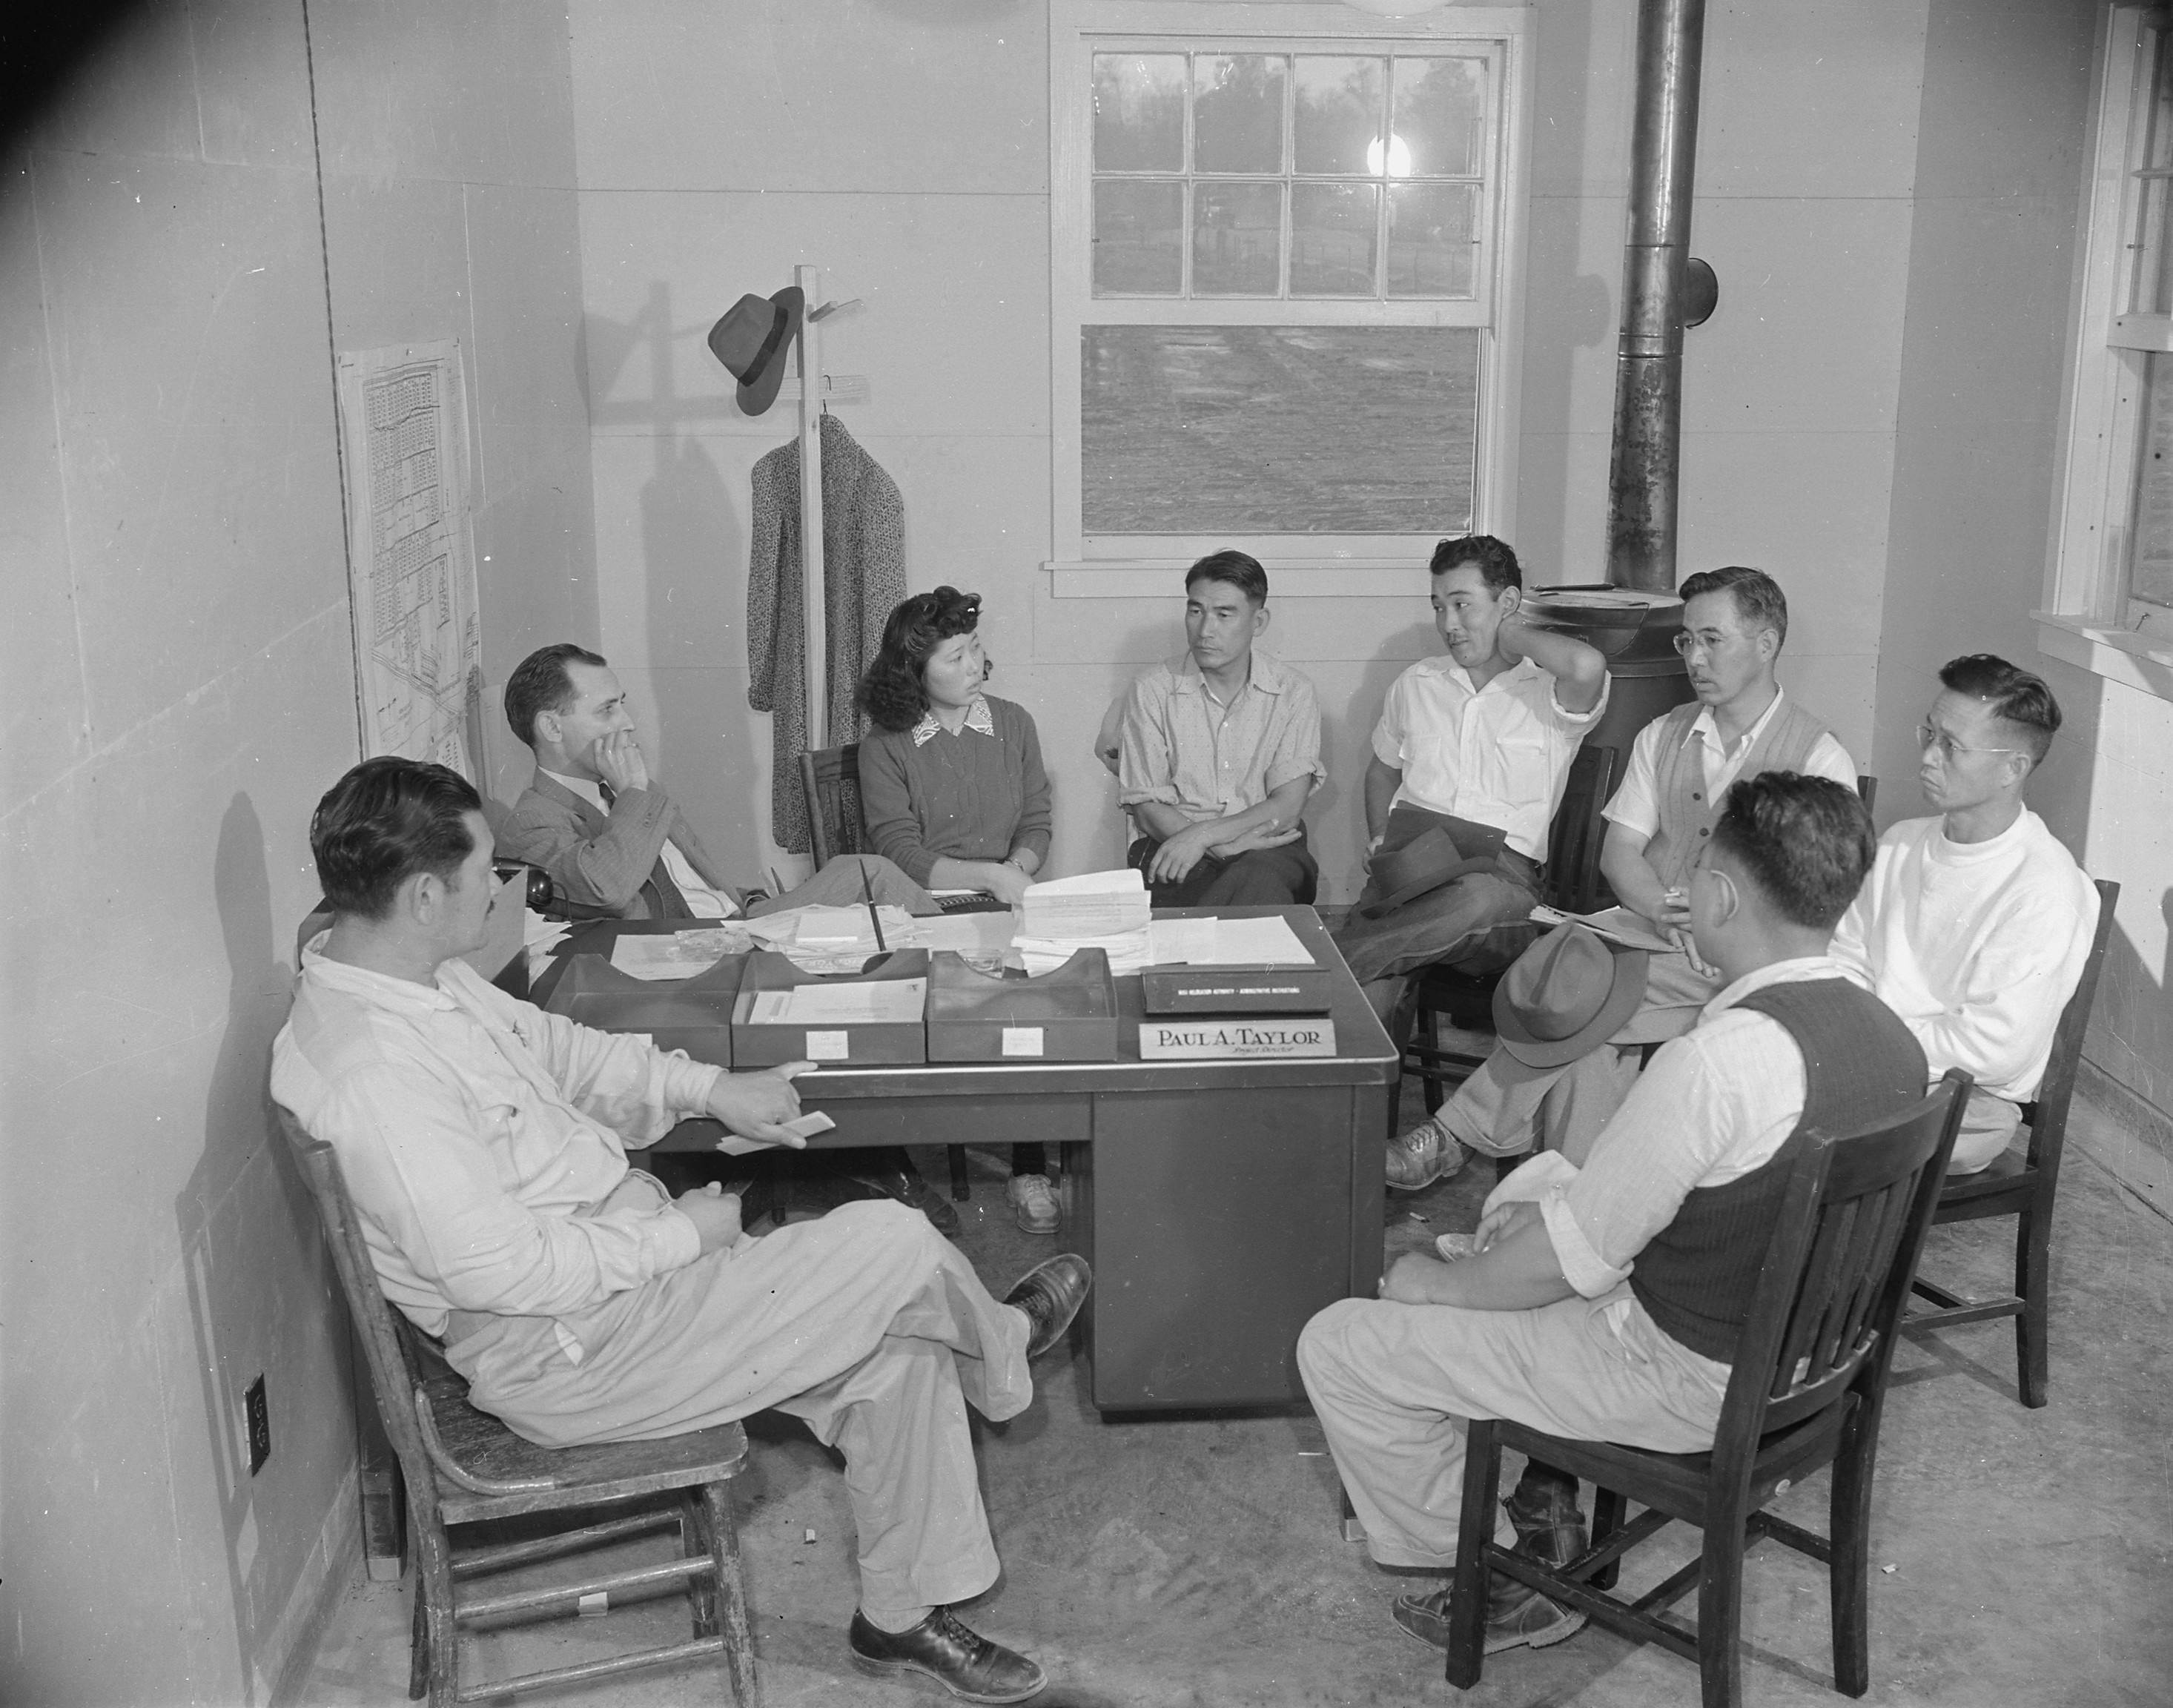 Project Director Paul Taylor speaking with the Council Committee of Jerome War Relocation Center, Arkansas, United States, 18 Nov 1942, photo 1 of 2